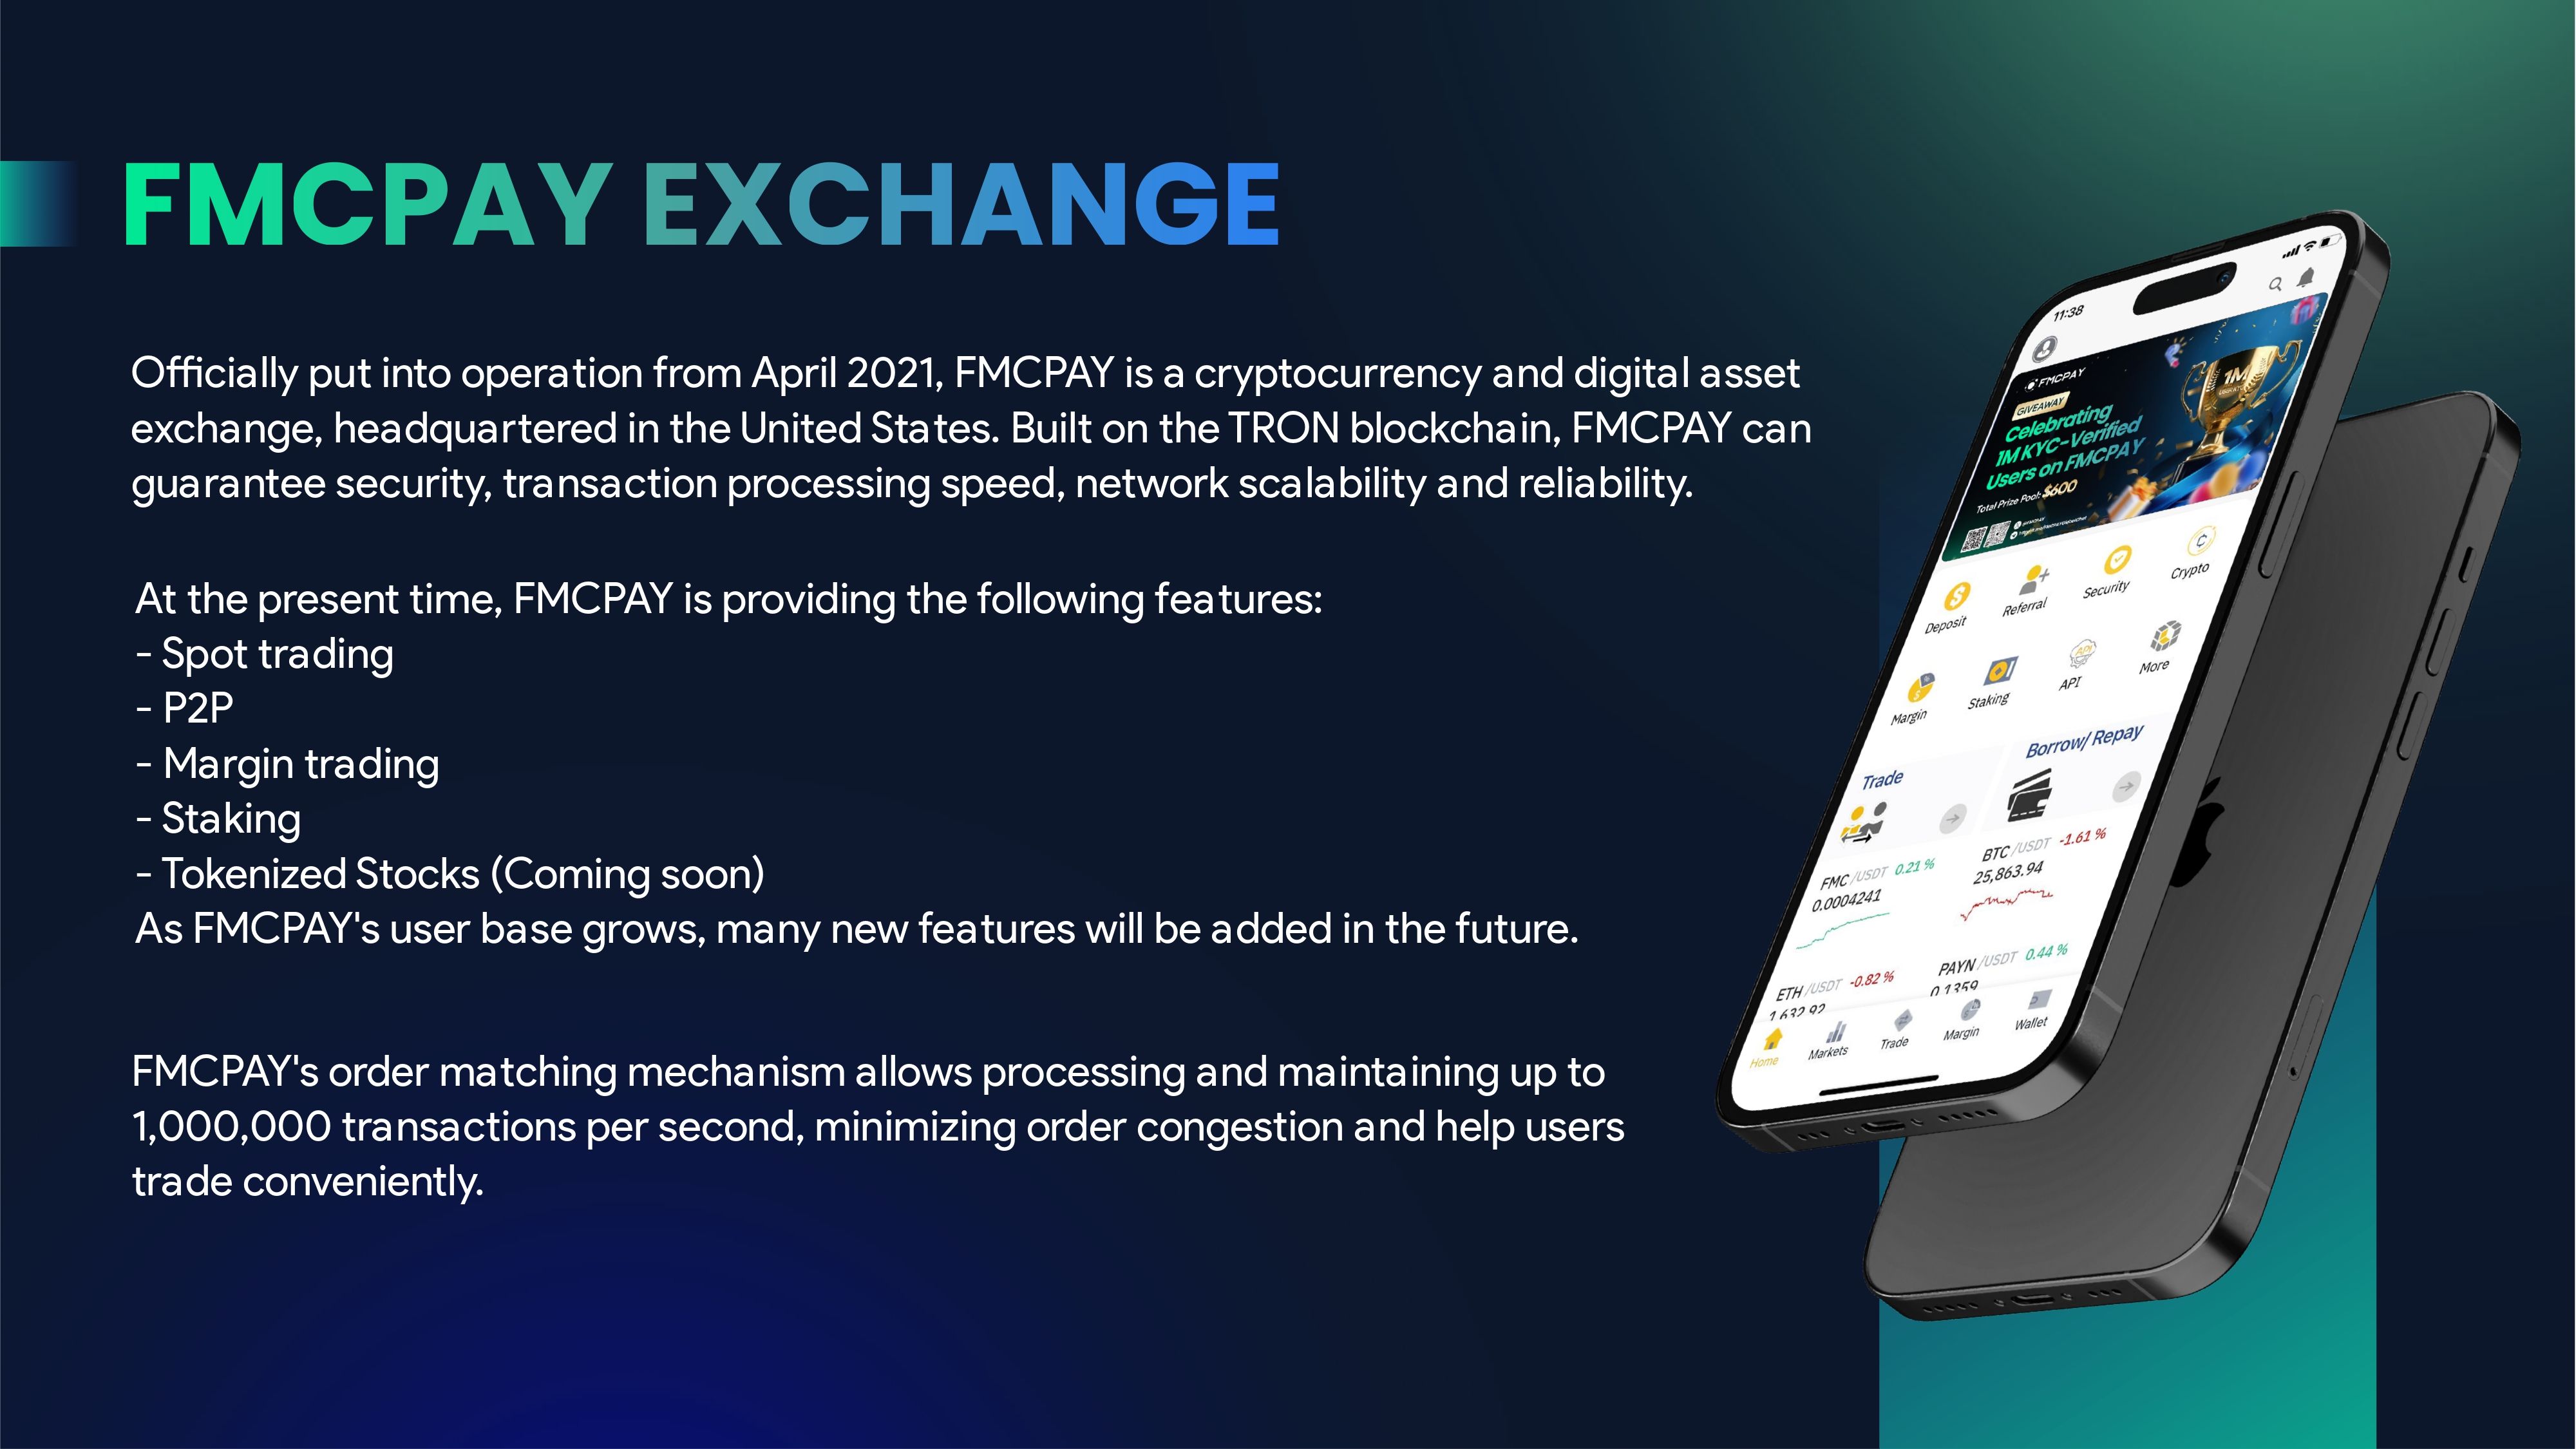 fmcpay-exchange-officially-listed-on-coinmarketcap